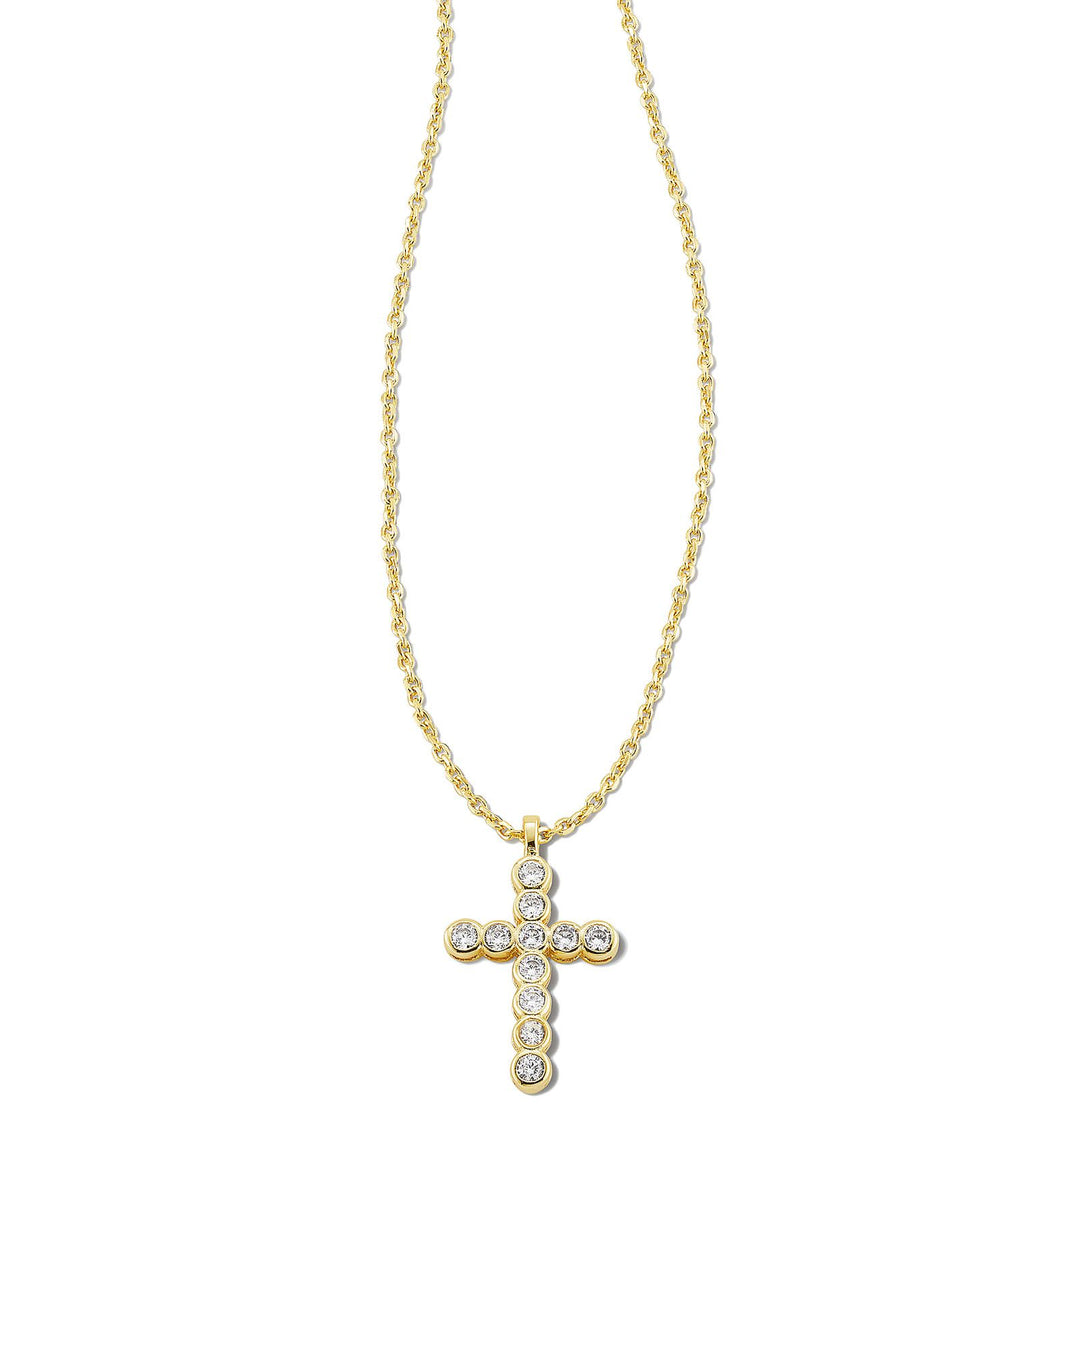 CROSS CRYSTAL PENDANT NECKLACE, GOLD WHITE CRYSTAL